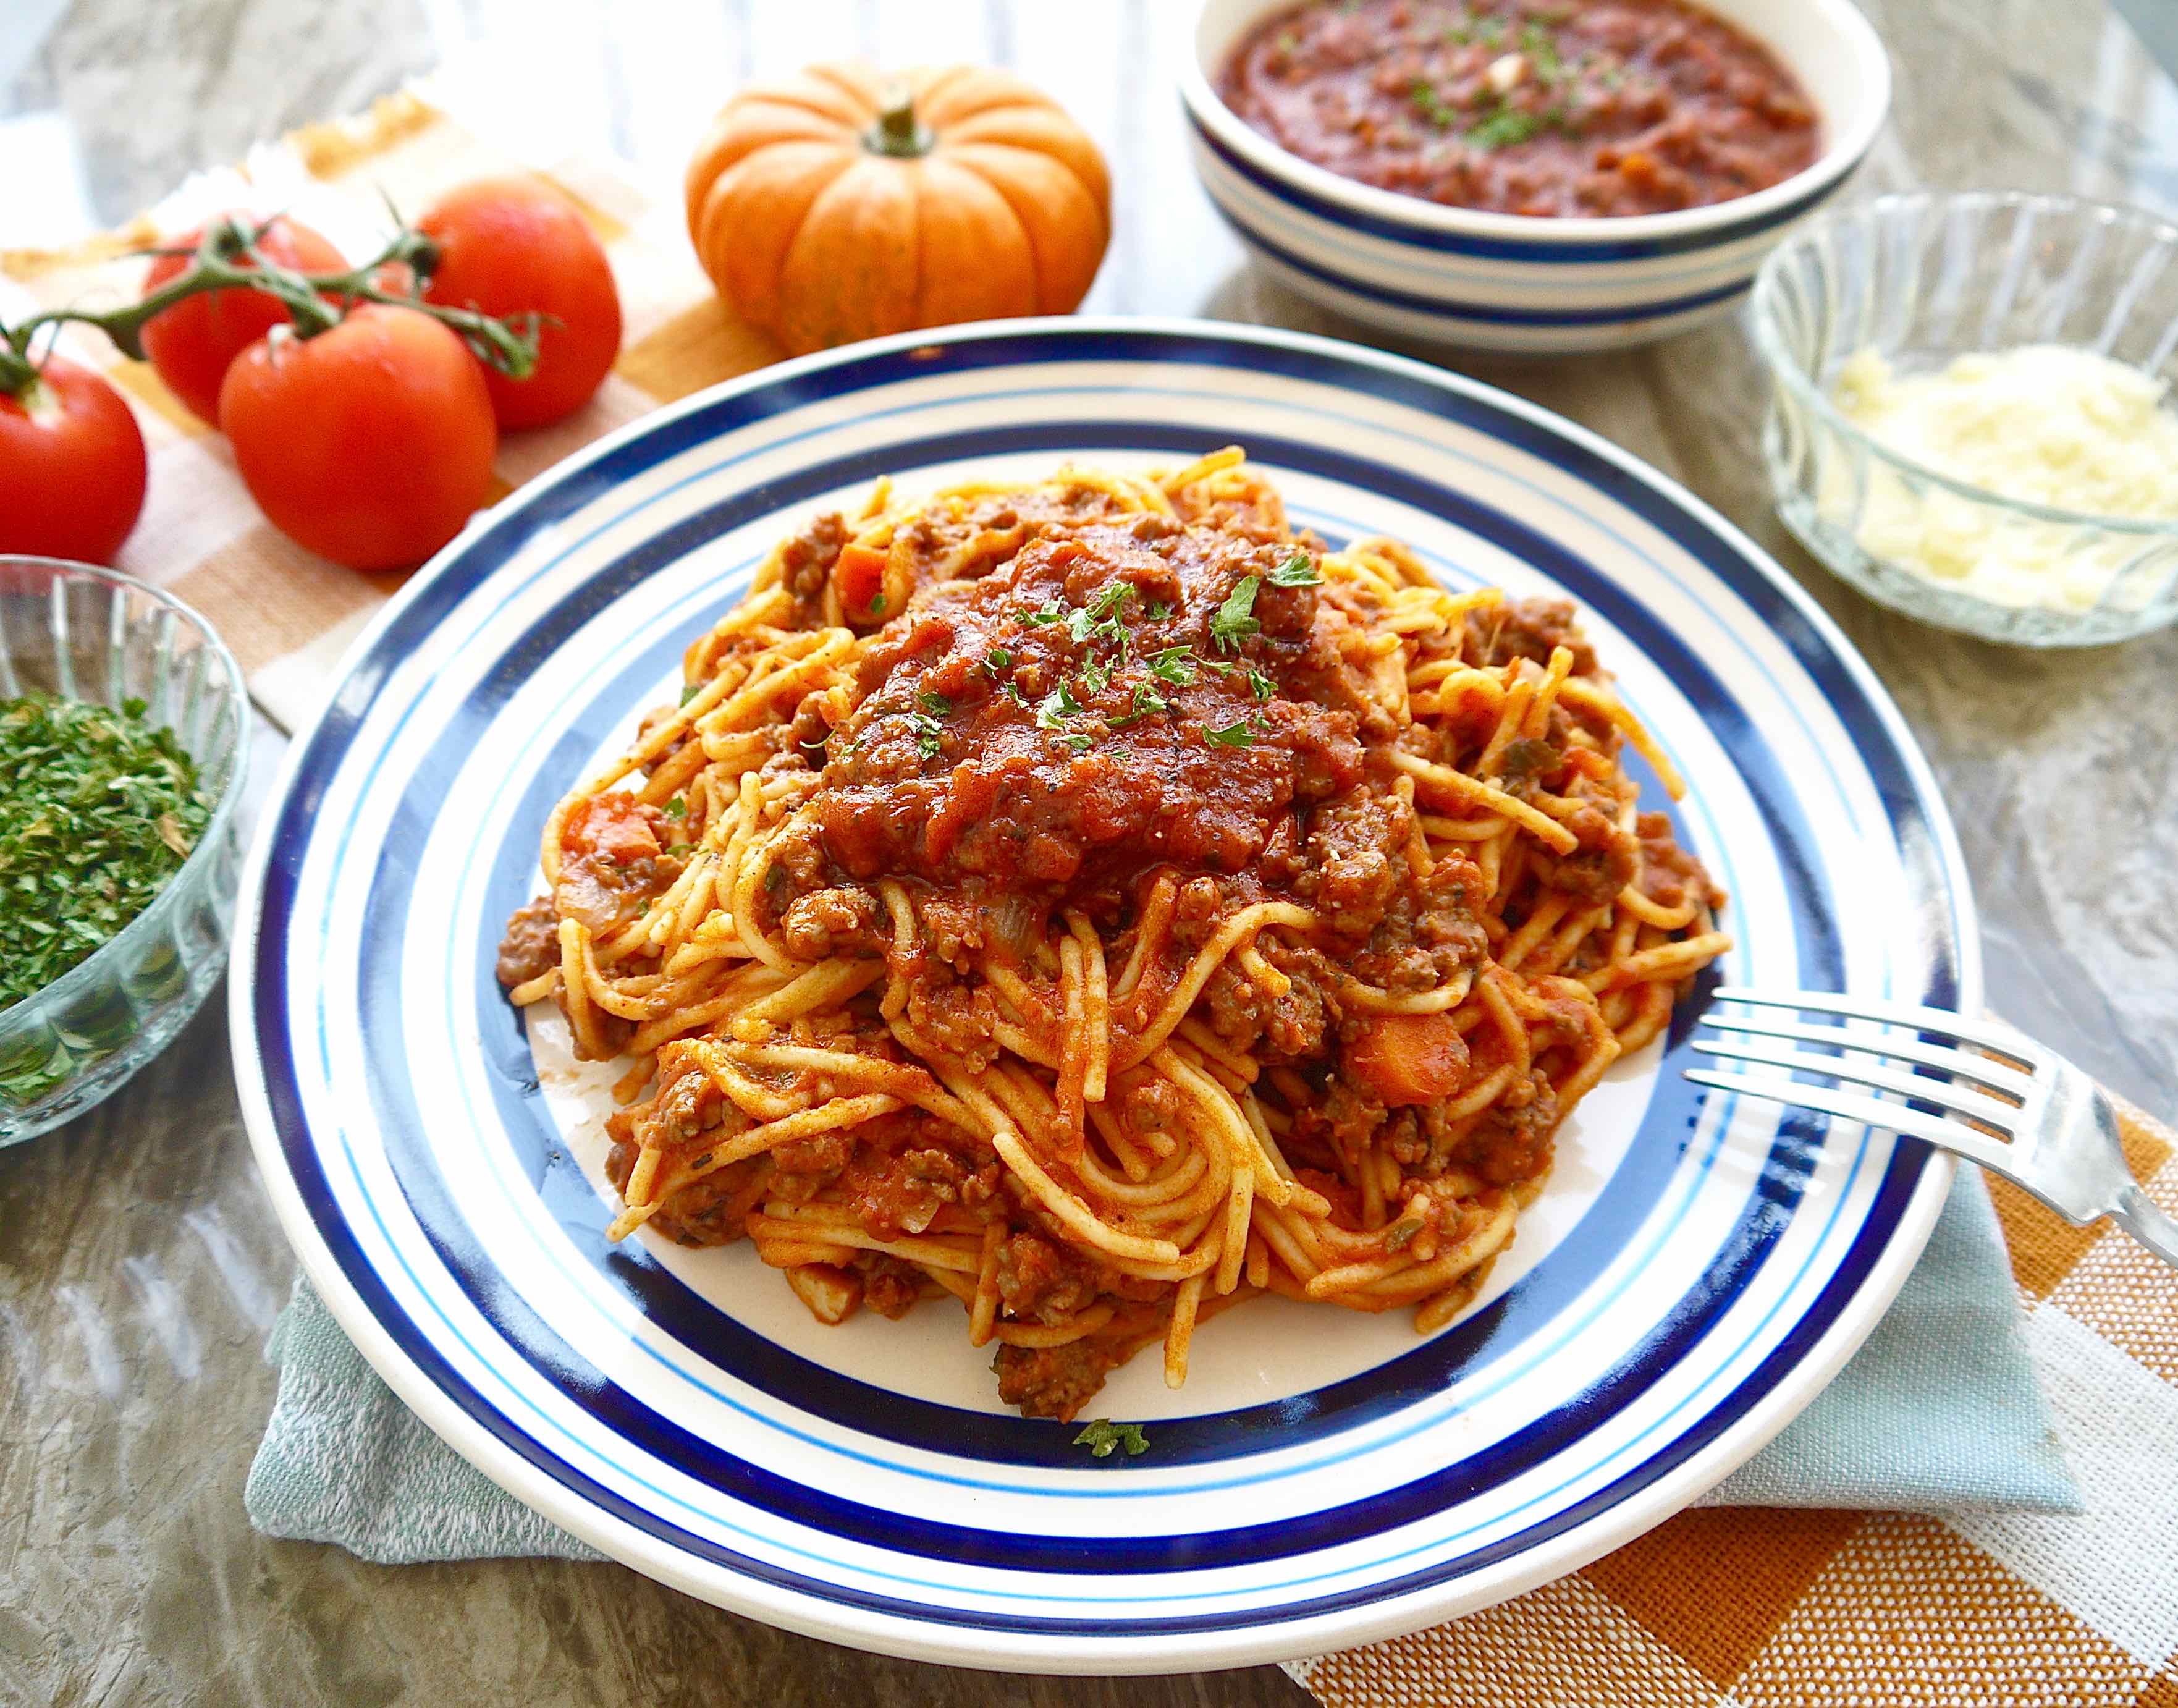 Pumpkin tomato sauce with ground beef on a plate.